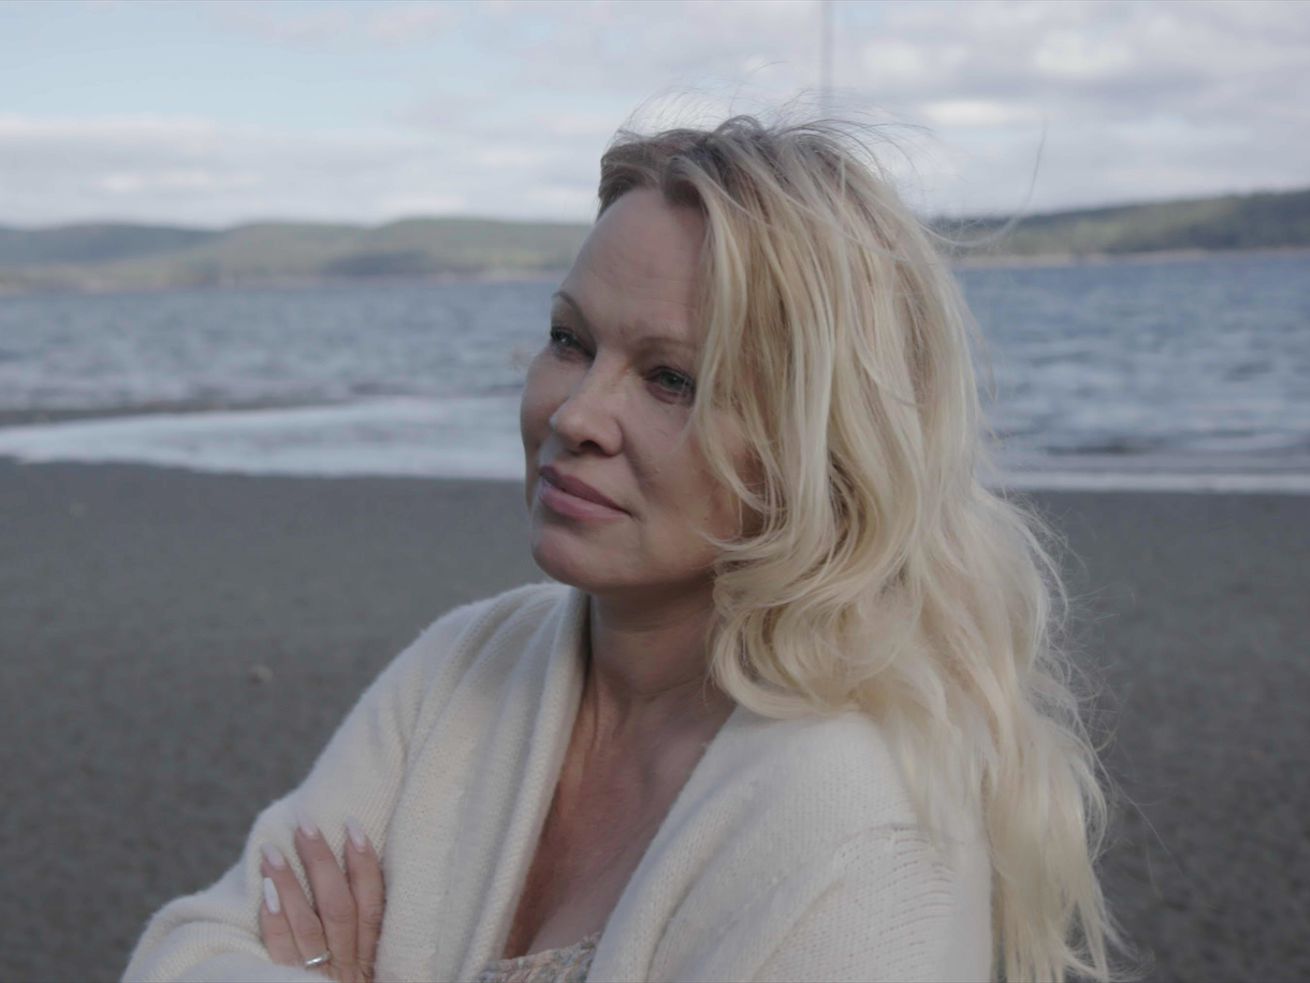 Actress Pamela Anderson stands on a beach, the ocean behind her. She is wearing a white sweater with her long blond hair loose, and her arms crossed, with a thoughtful look.  